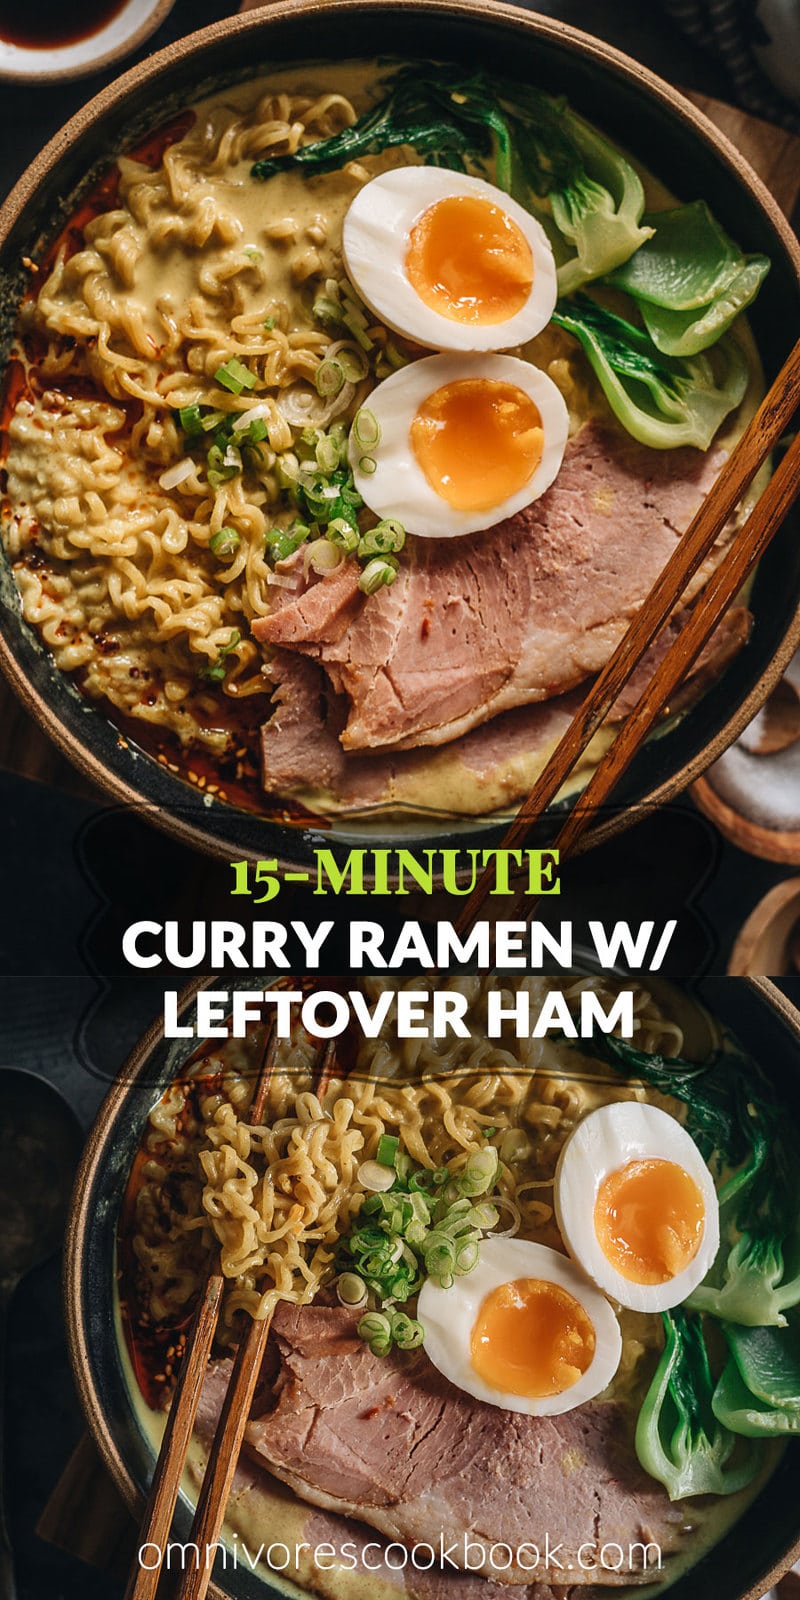 15-Minute Curry Ramen with Leftover Ham | A super easy recipe that turns your leftover ham into a scrumptious one-pot dinner. The curry broth is made with coconut milk, butter, and garlic to create a super rich texture that’s bursting with flavor. I’ve included notes so you can tweak the recipe using ingredients you already have in your pantry. {Gluten-Free adaptable}